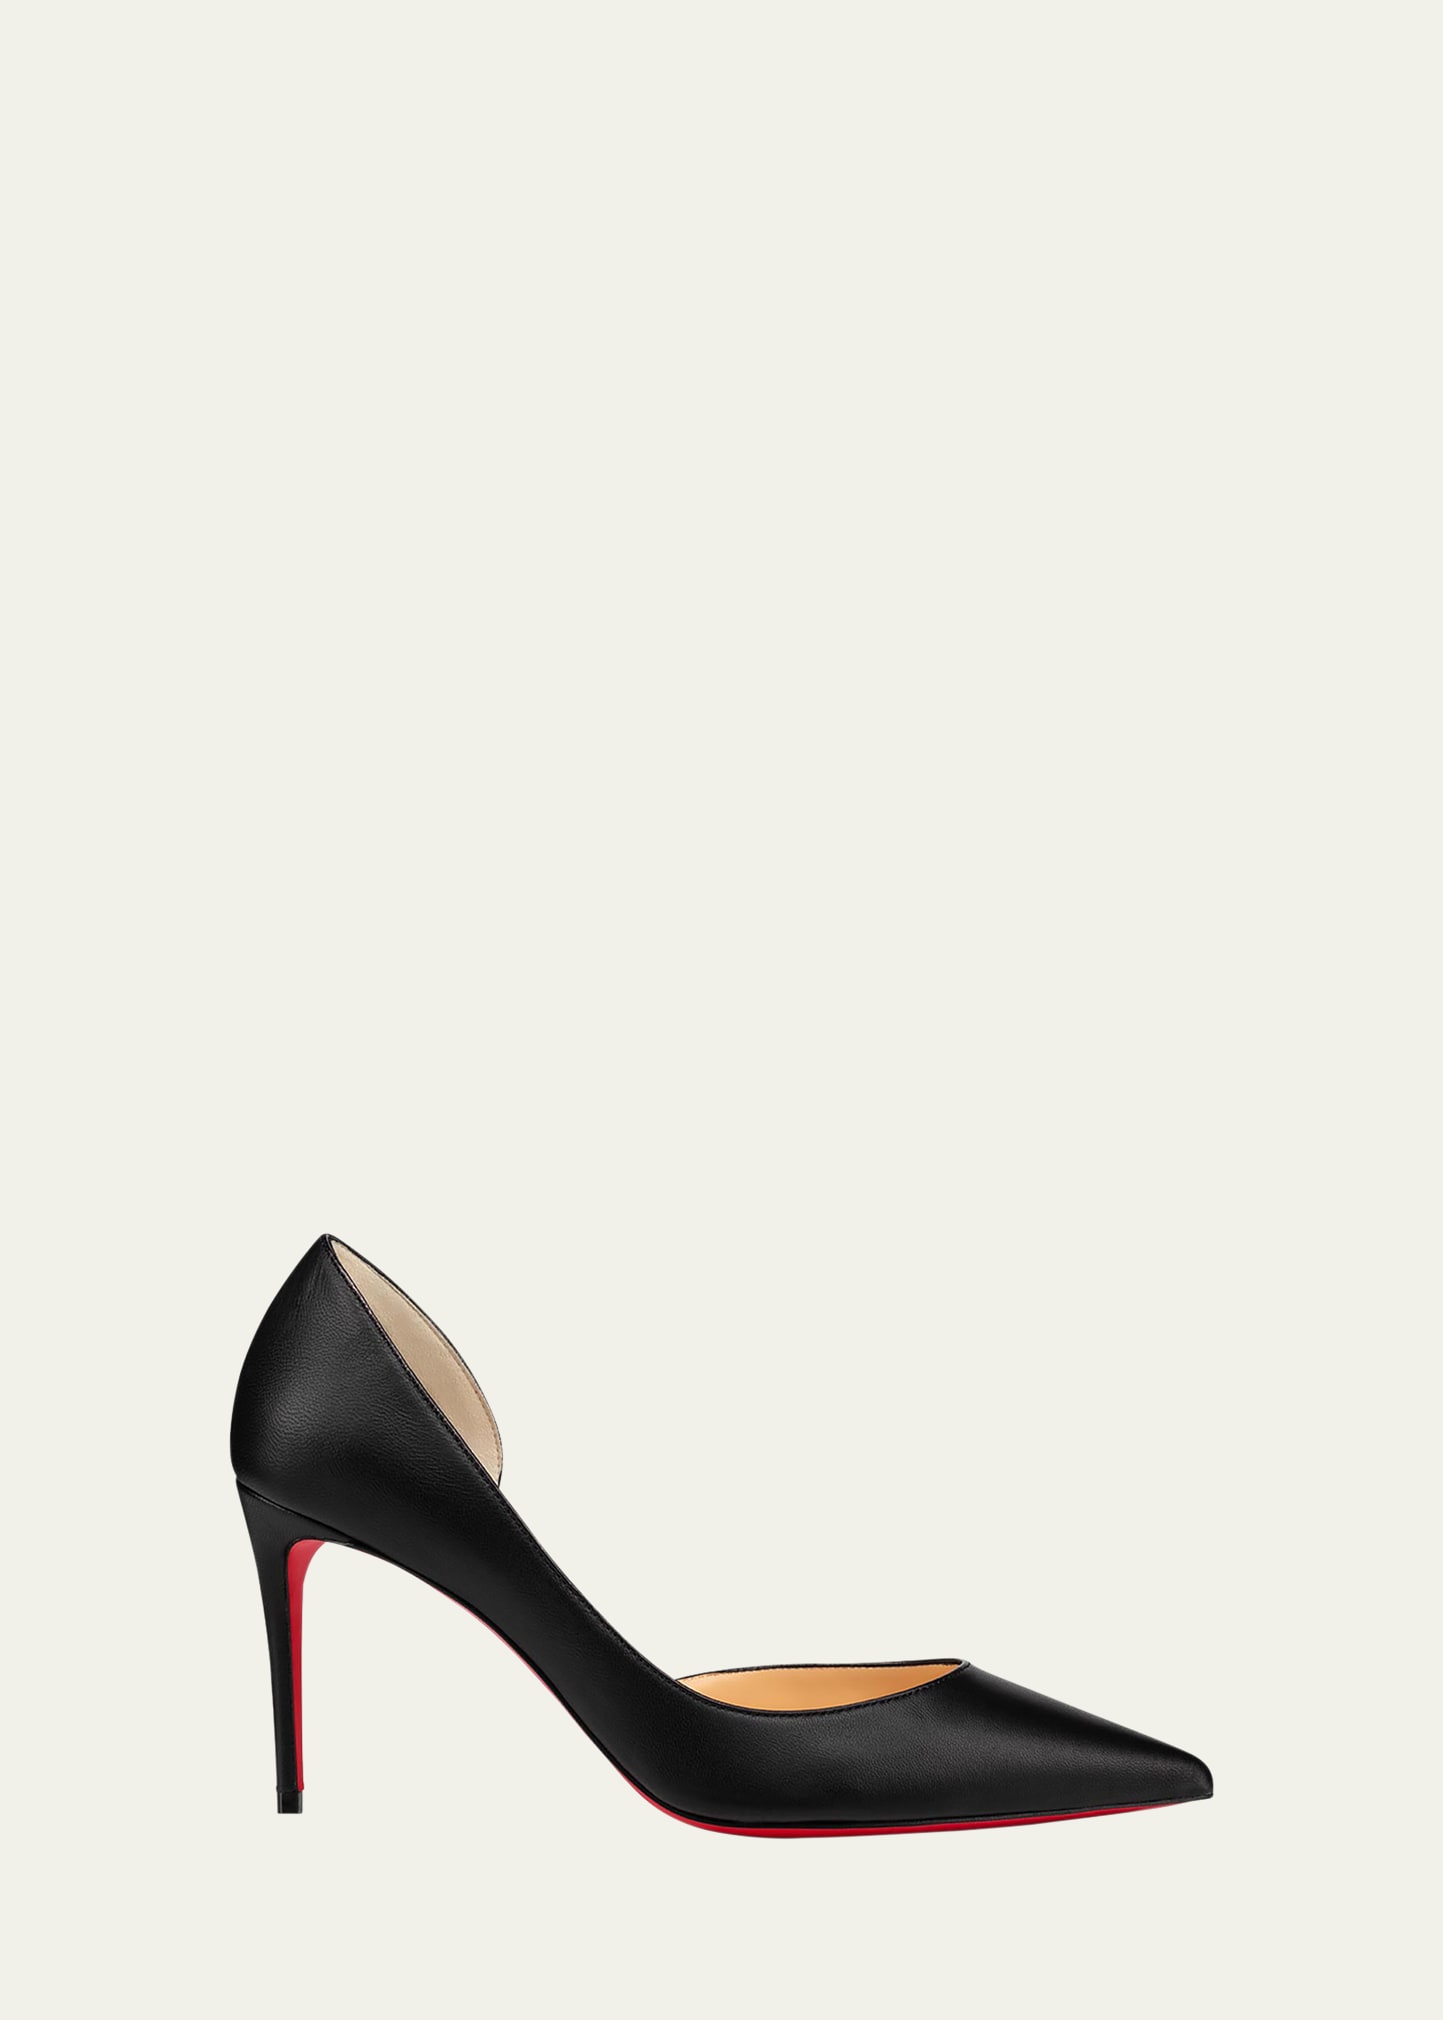 Iriza Leather Half-d'Orsay Red Sole Pumps